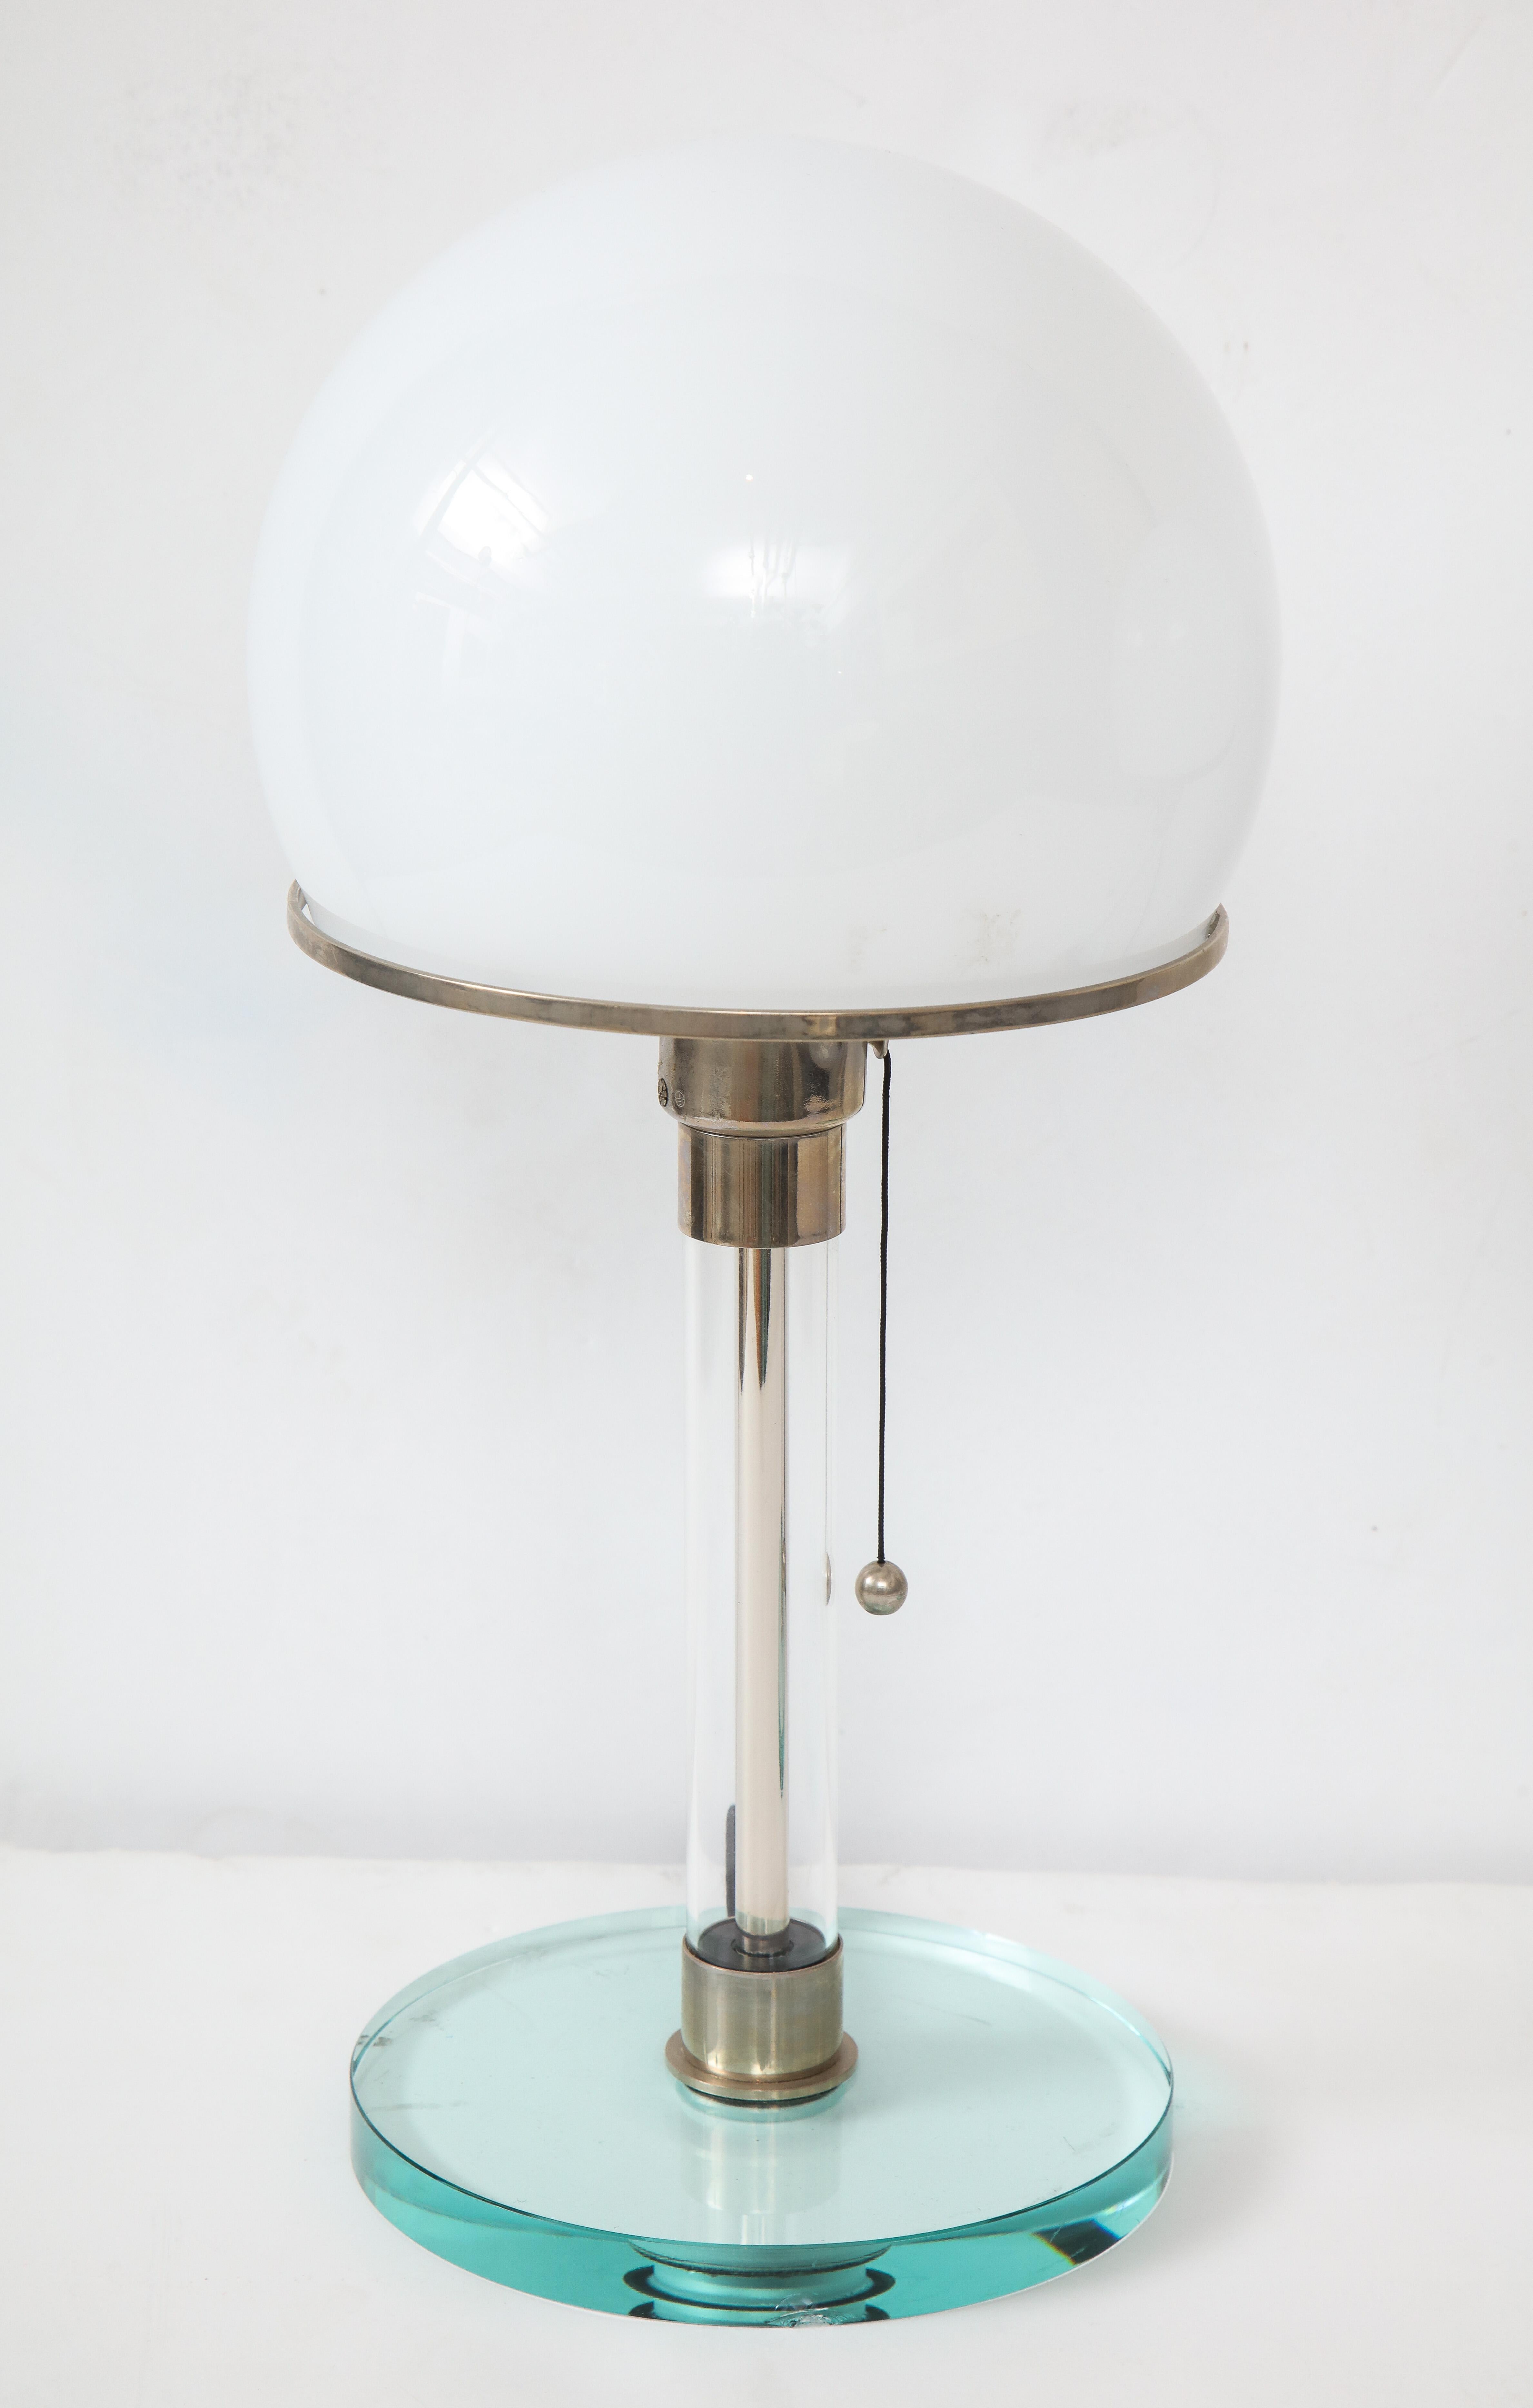 A pair of Bauhaus style table lamps designed by Wilhelm Wagenfeld and Karl Jucker on a blue Lucite base, chrome stem and domed glass shade in white.

??All lamps are consecutively numbered under the base and bear the Bauhaus and TECNOLUMEN